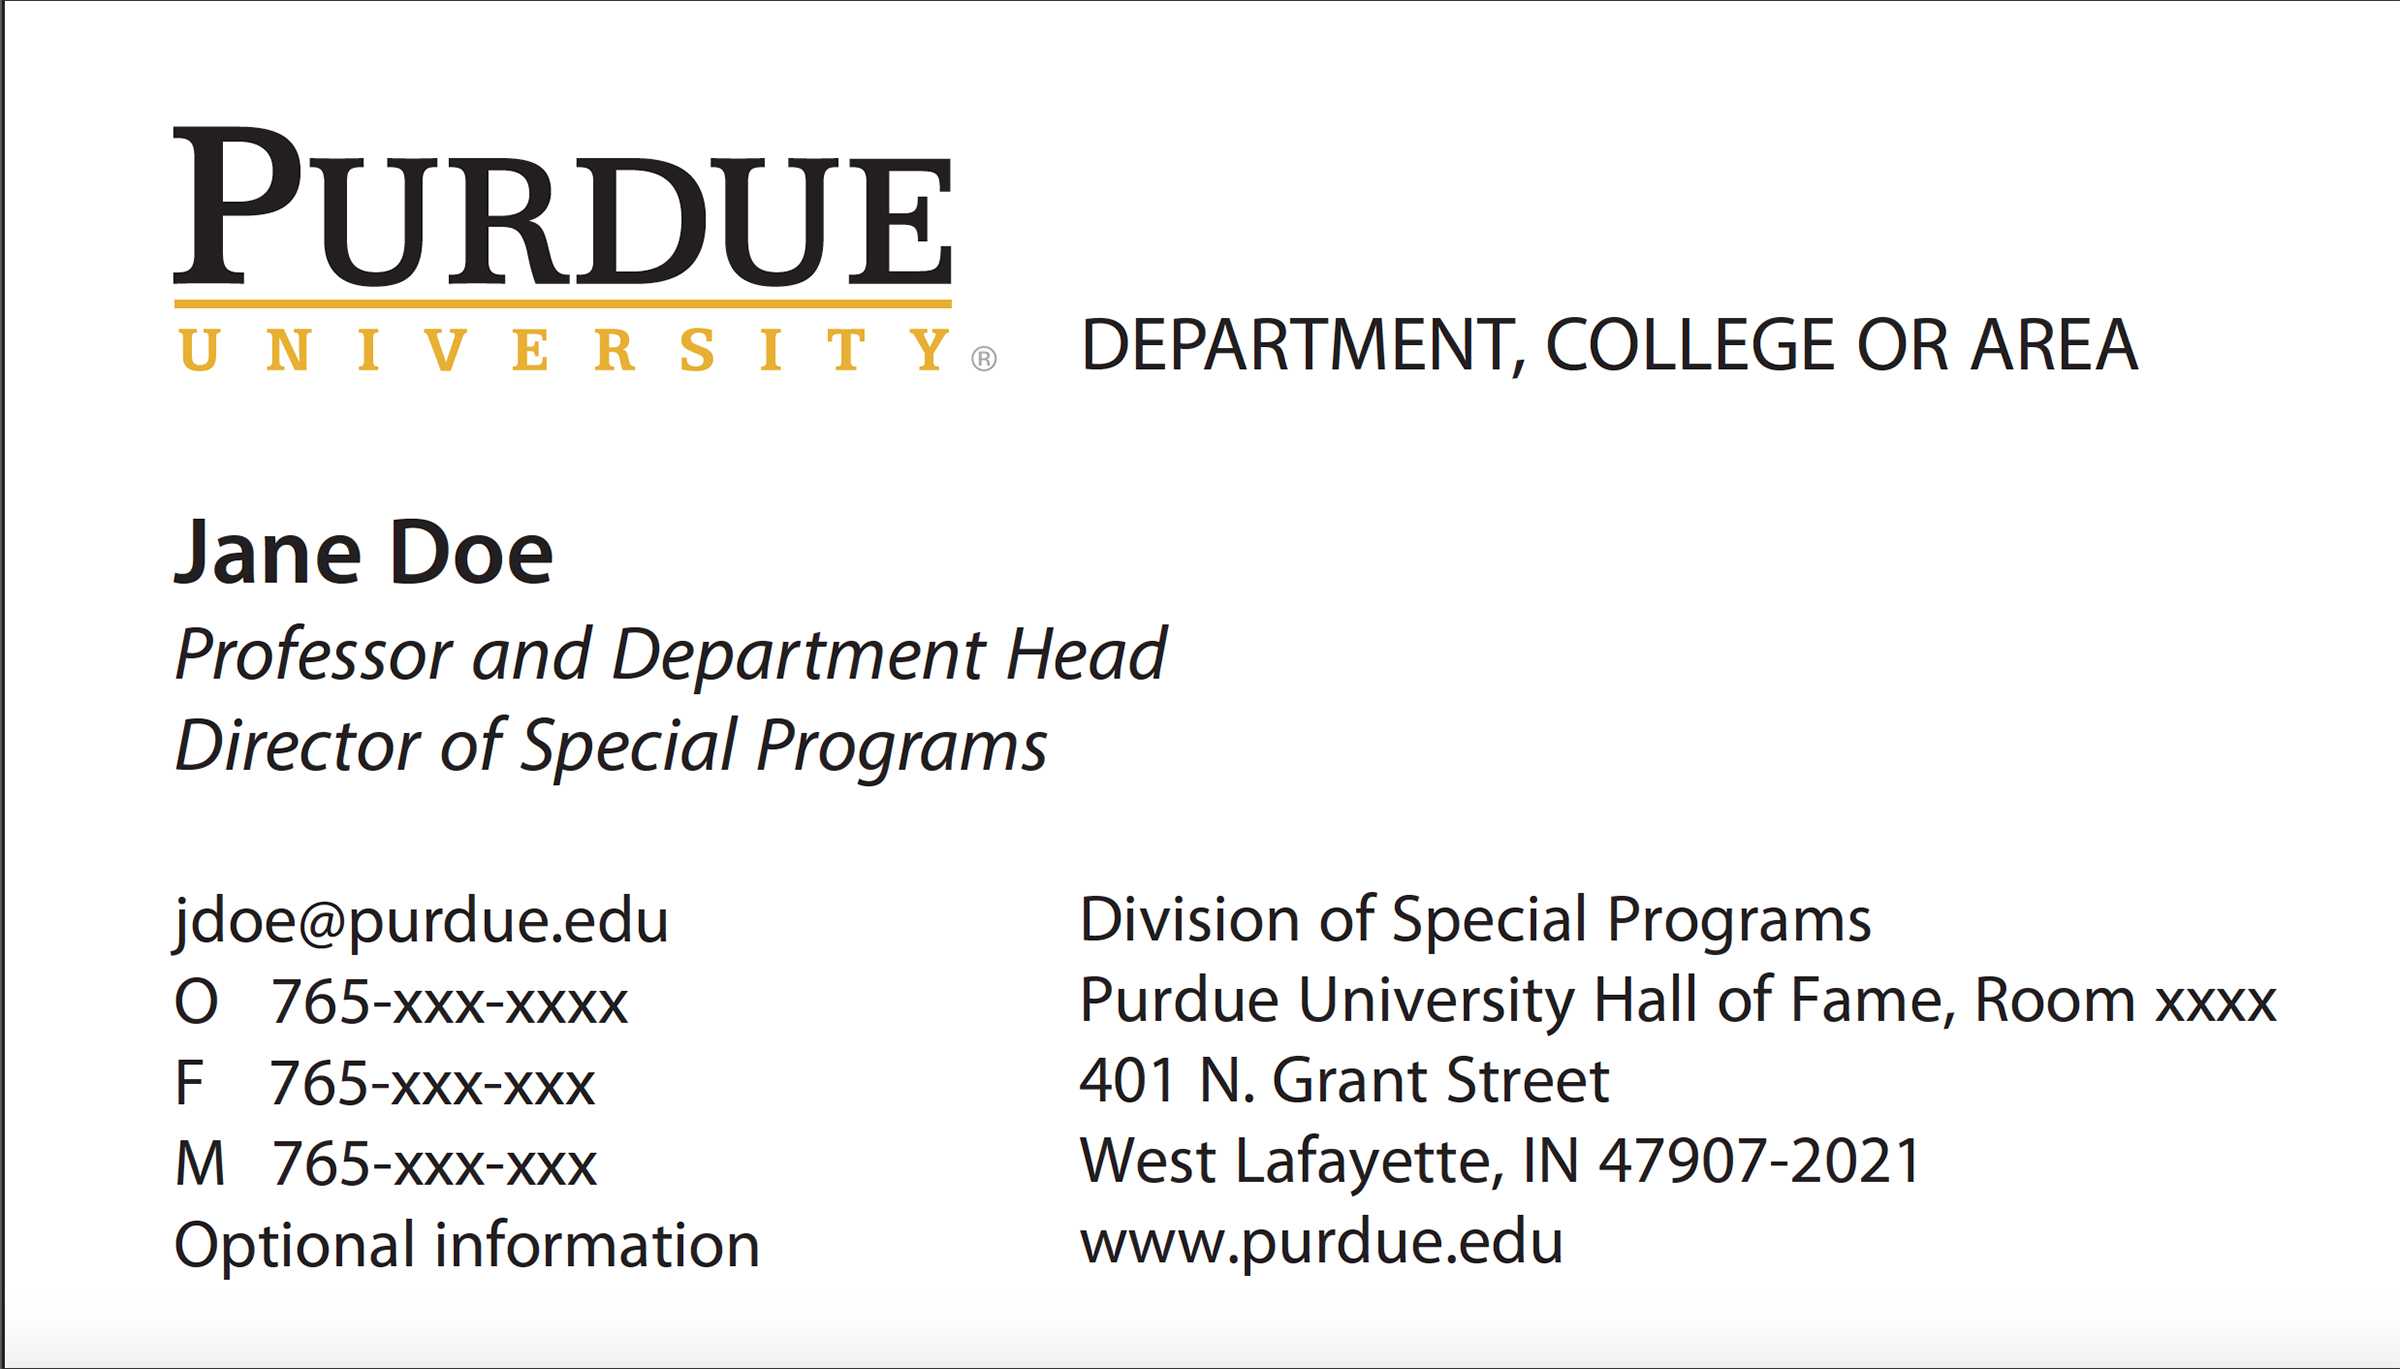 New Business Card Template Now Online - Purdue University News Throughout Graduate Student Business Cards Template